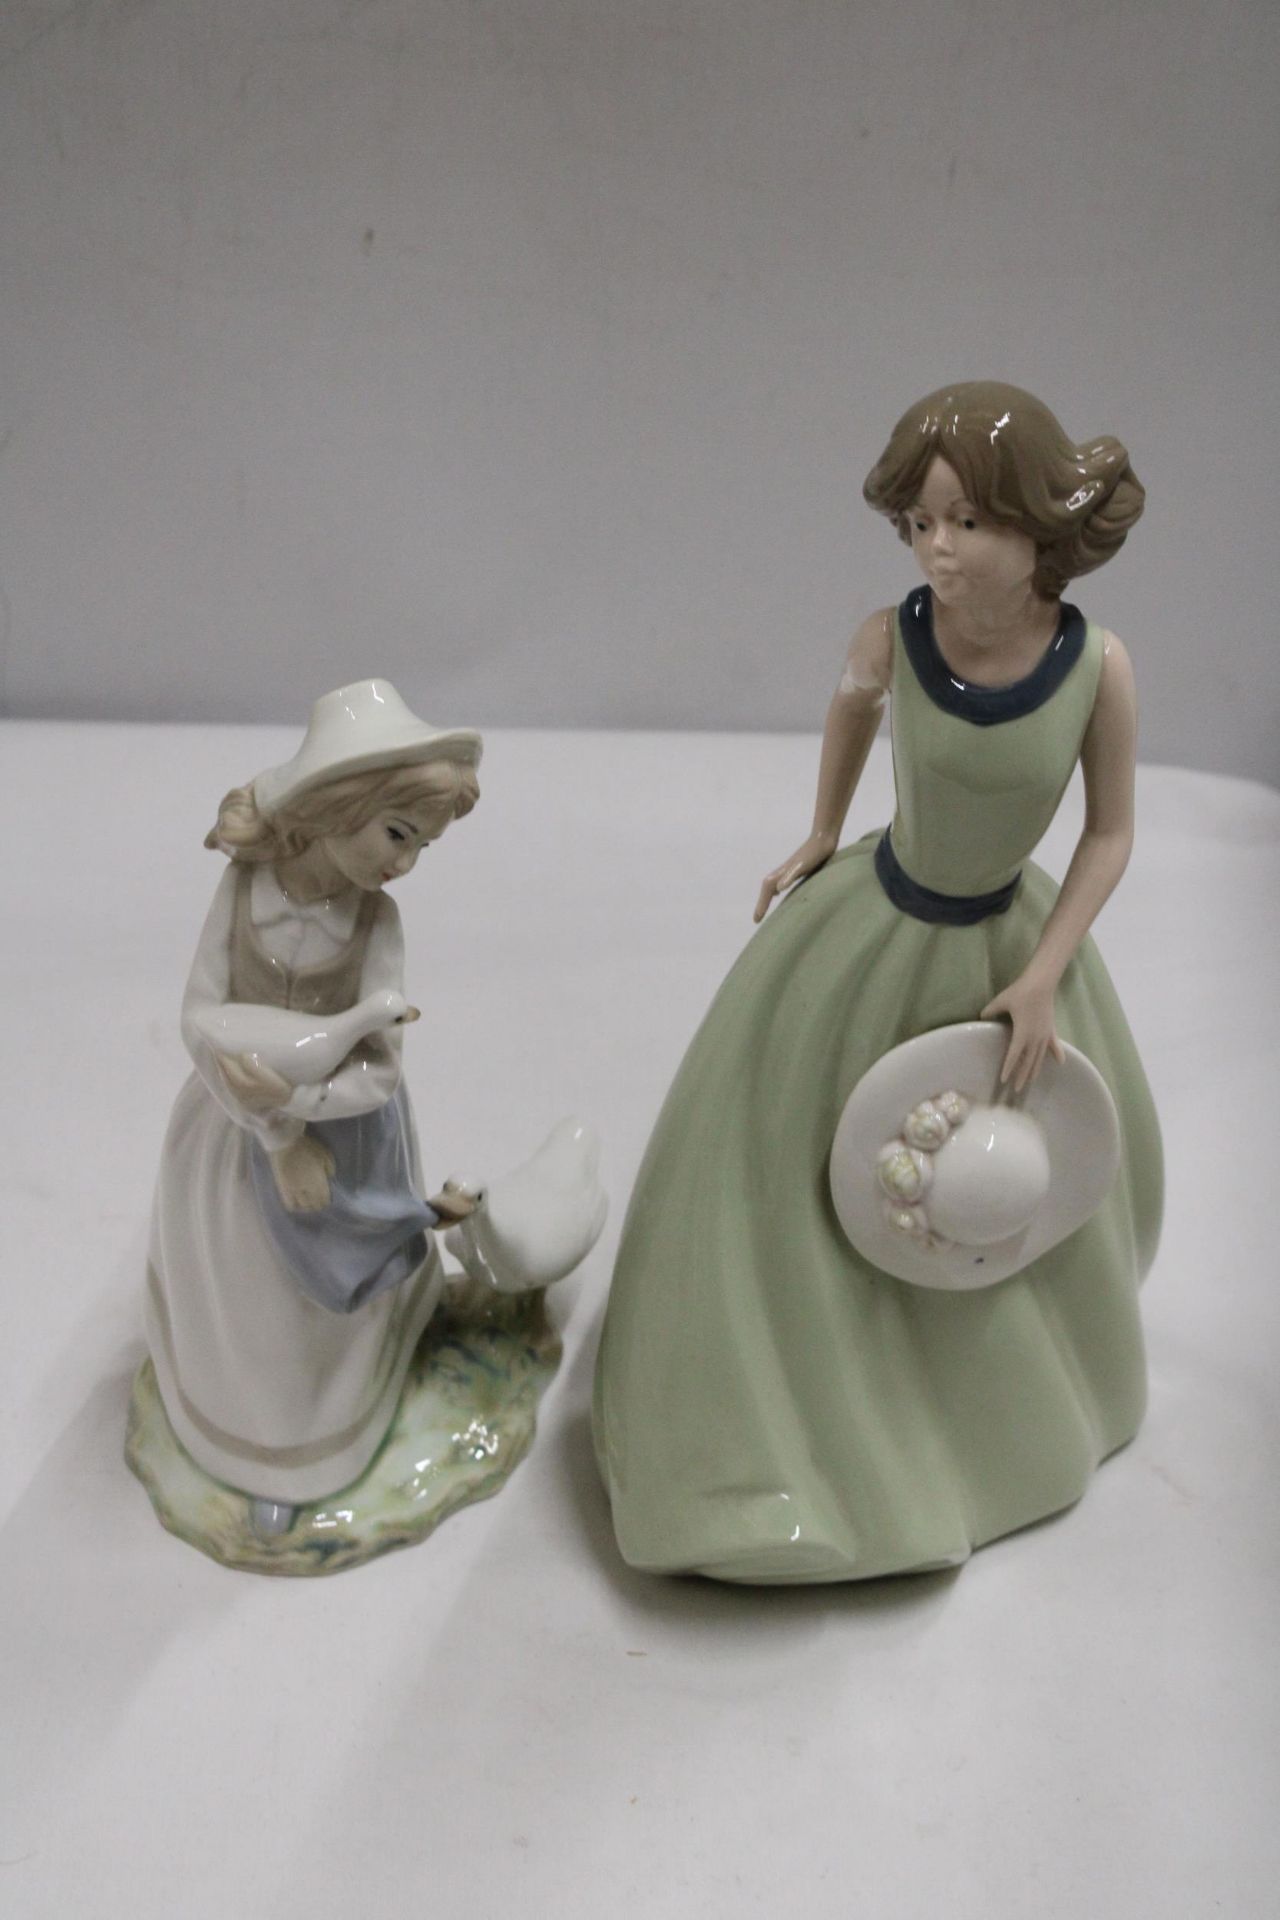 TWO SPANISH LADY FIGURES - TENGRA A GIRL WITH GEESE AND A NADEL FIGURE GIRL HOLDING A HAT